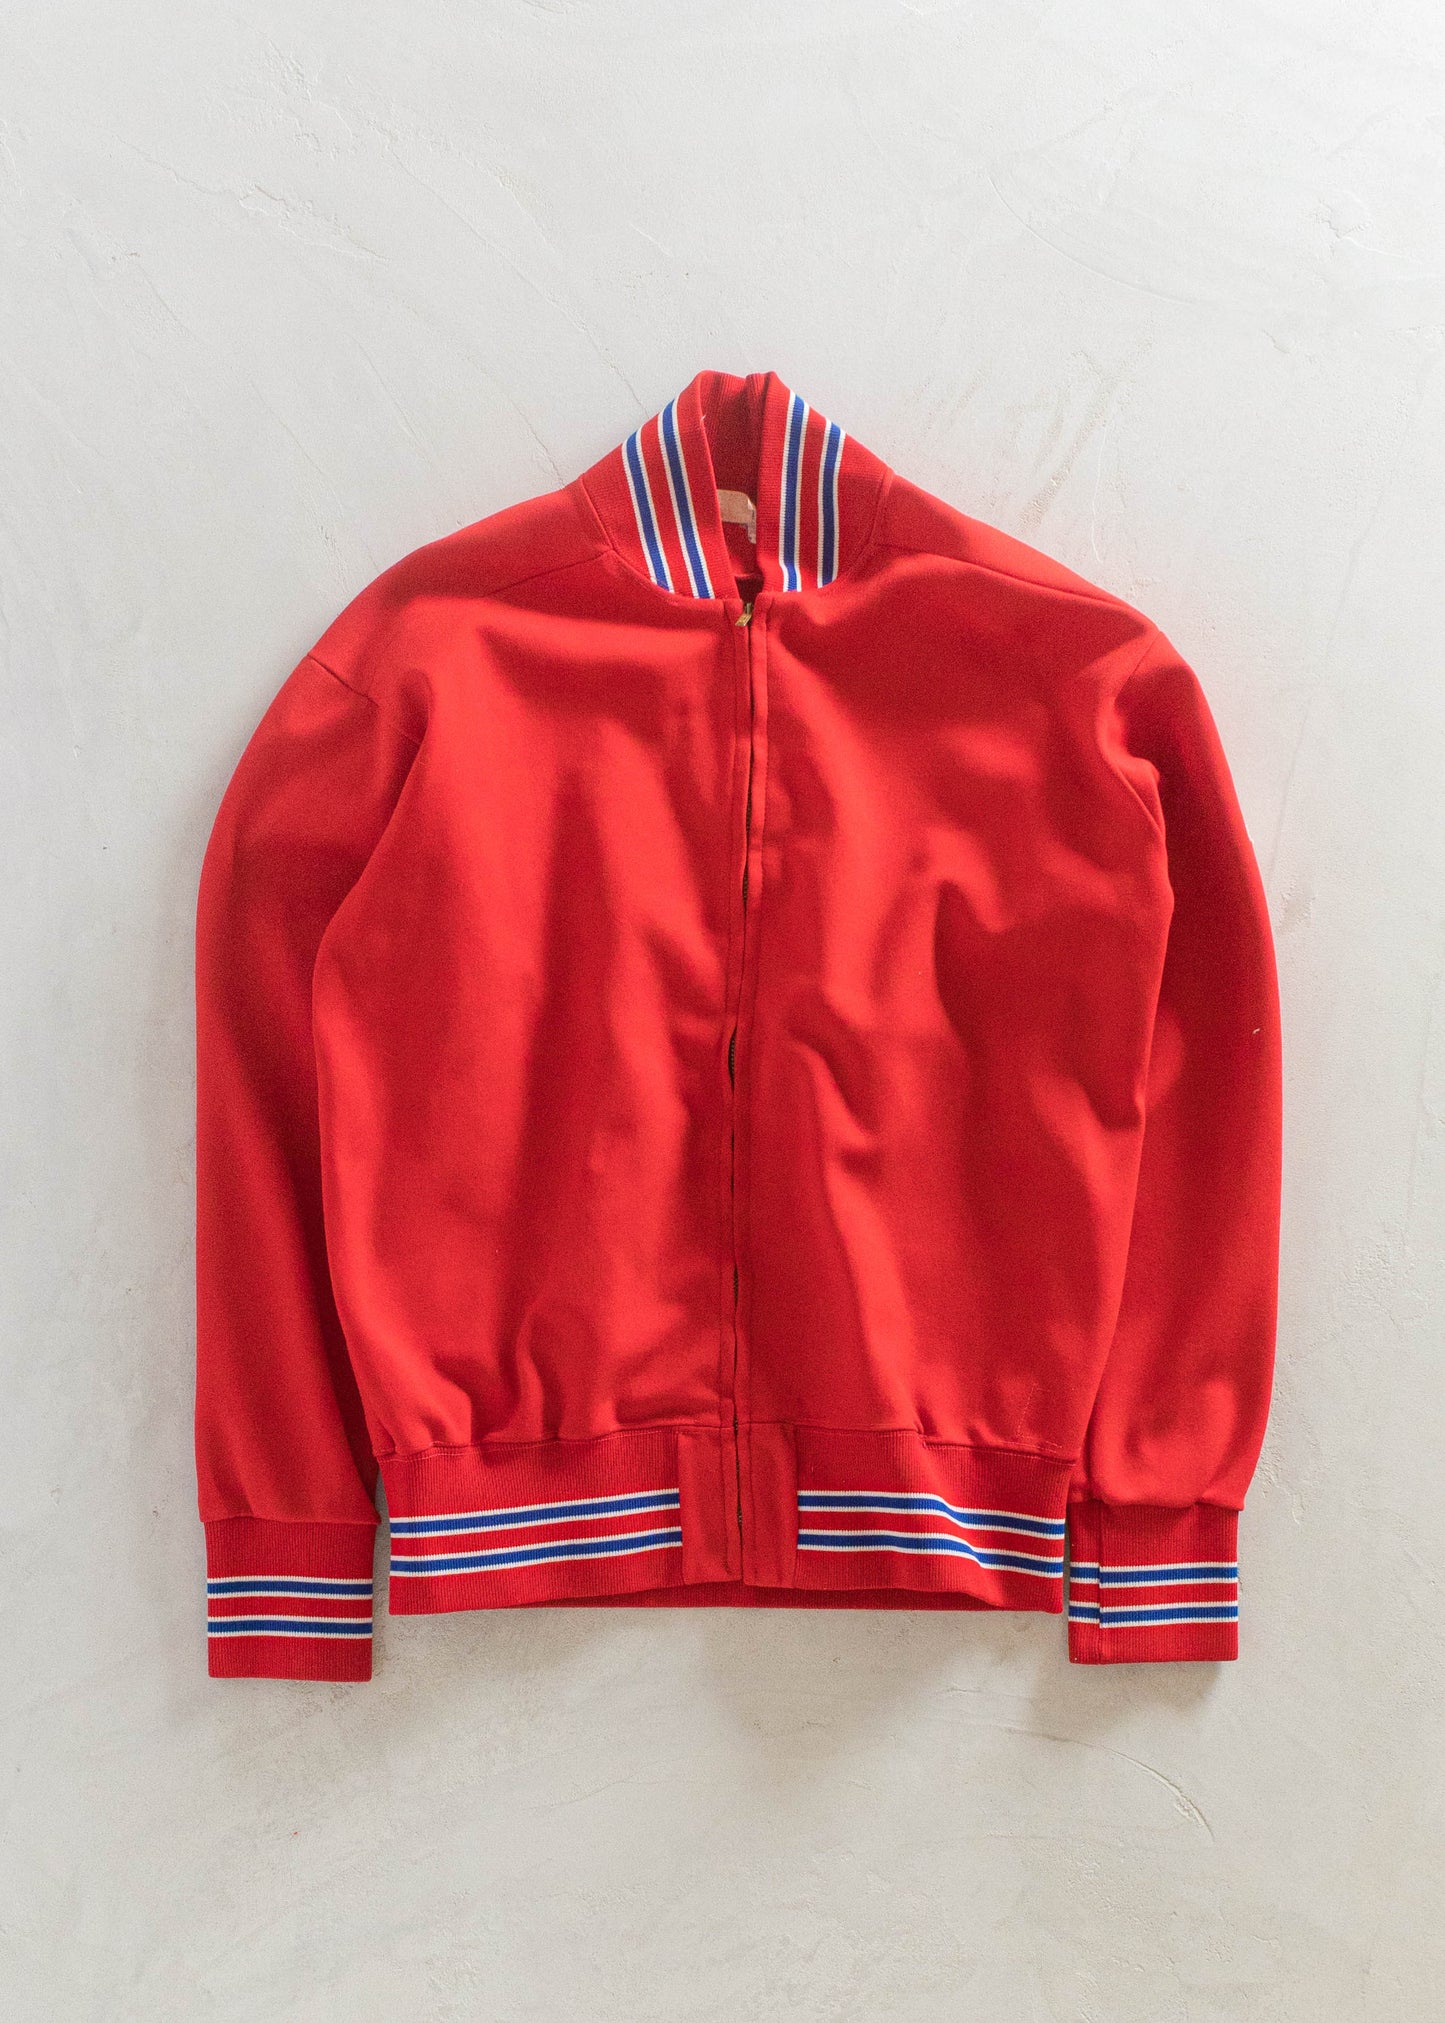 1960s Wilson Track Jacket Size S/M